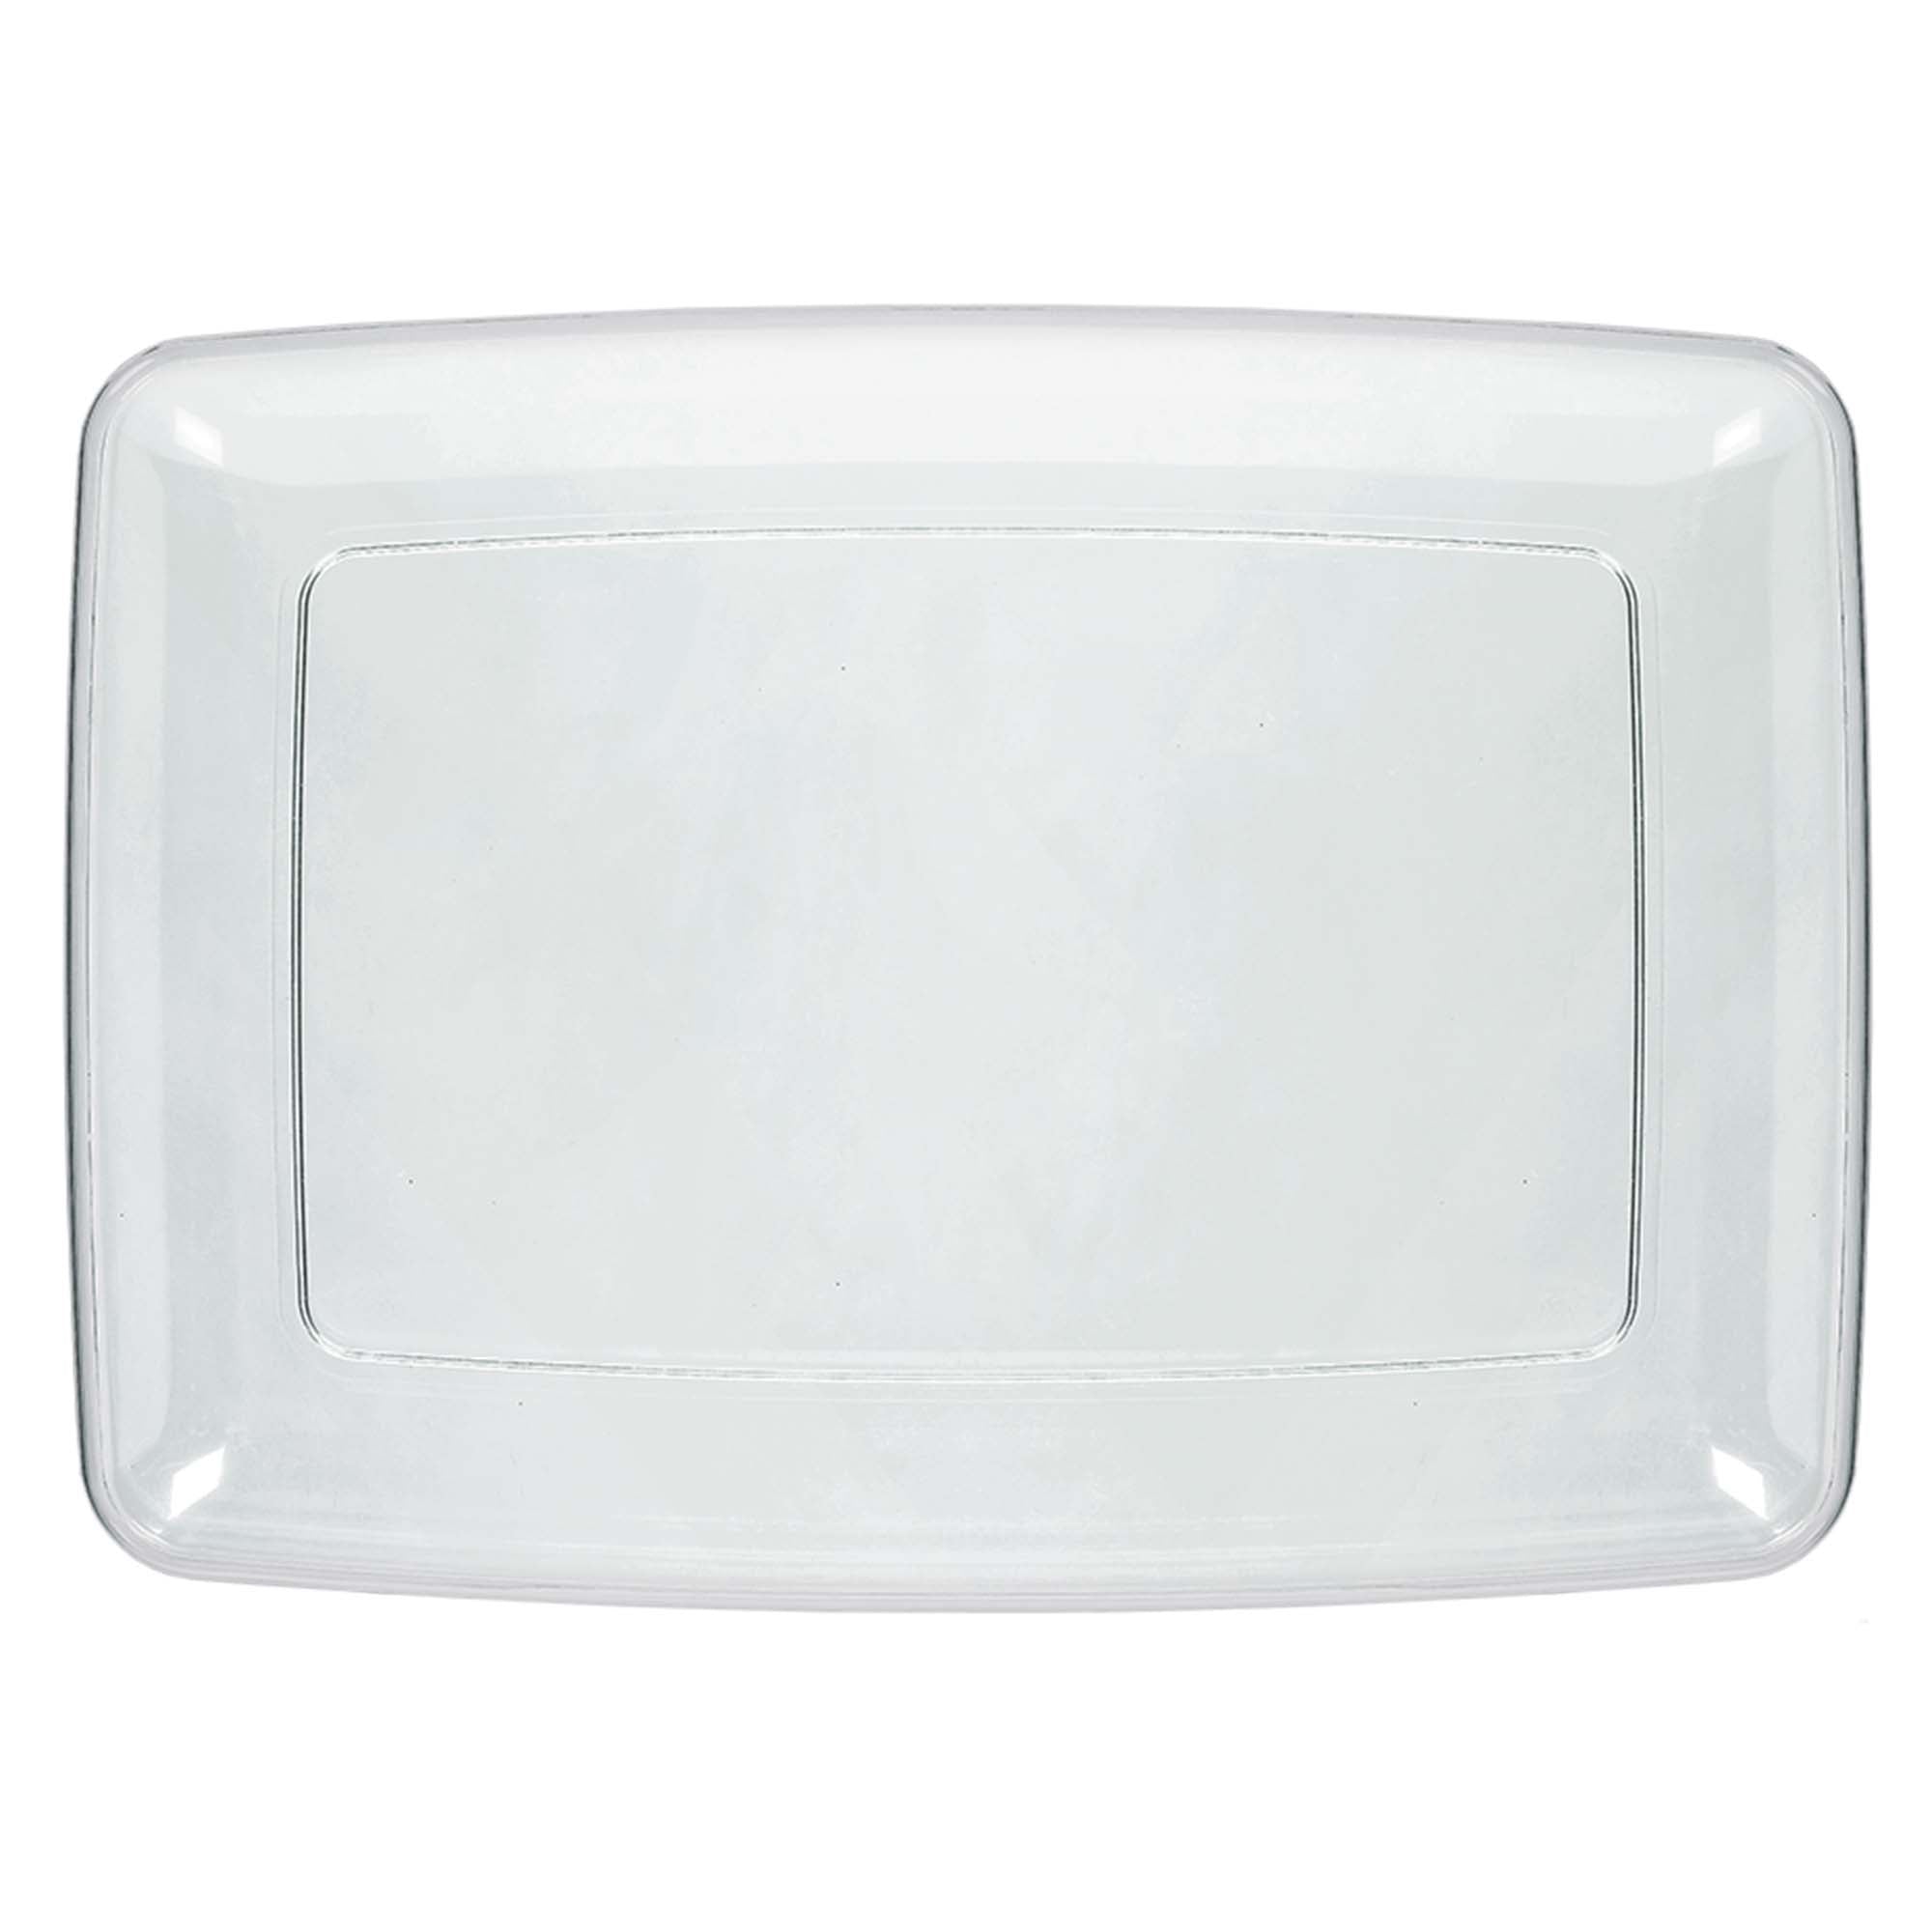 Clear 8" x 10 3/4" Serving Tray